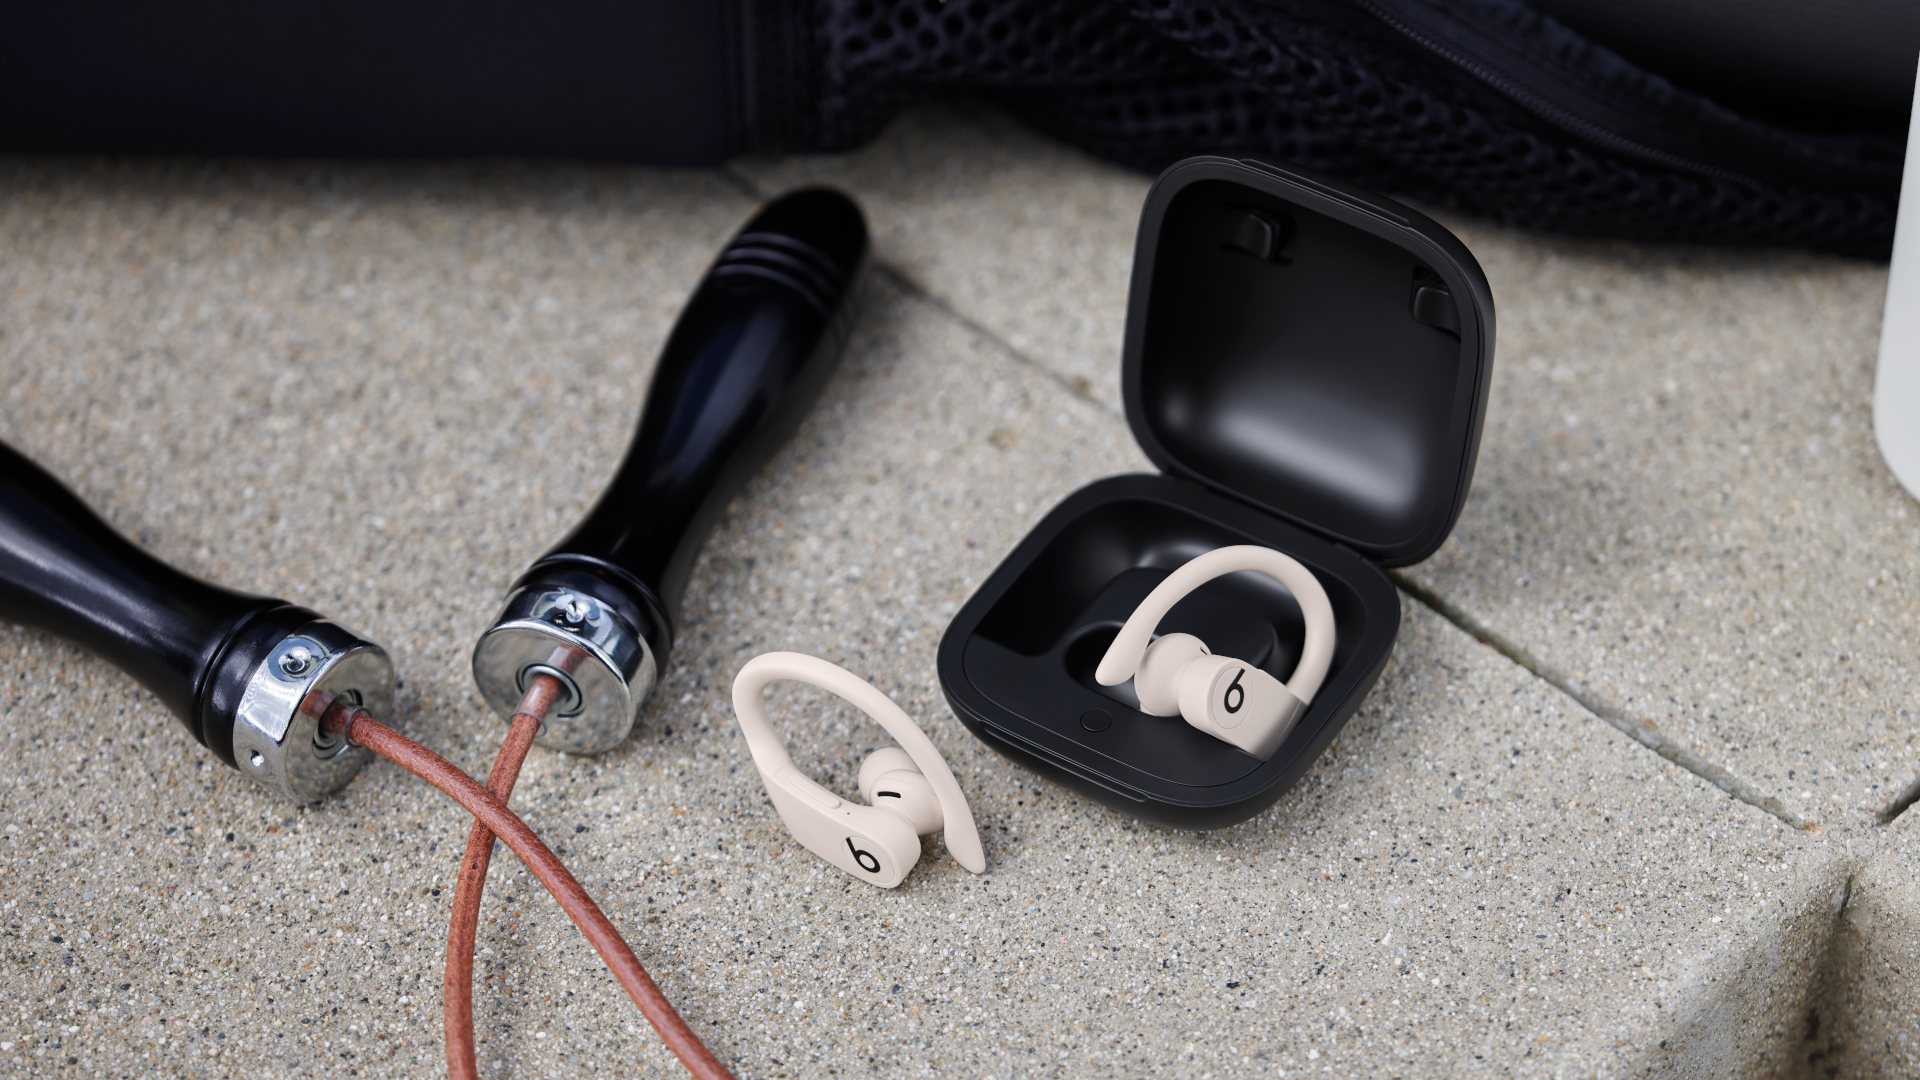 The Beats Powerbeats Pro true wireless earbuds in white, inside a black charging case next to a skipping rope